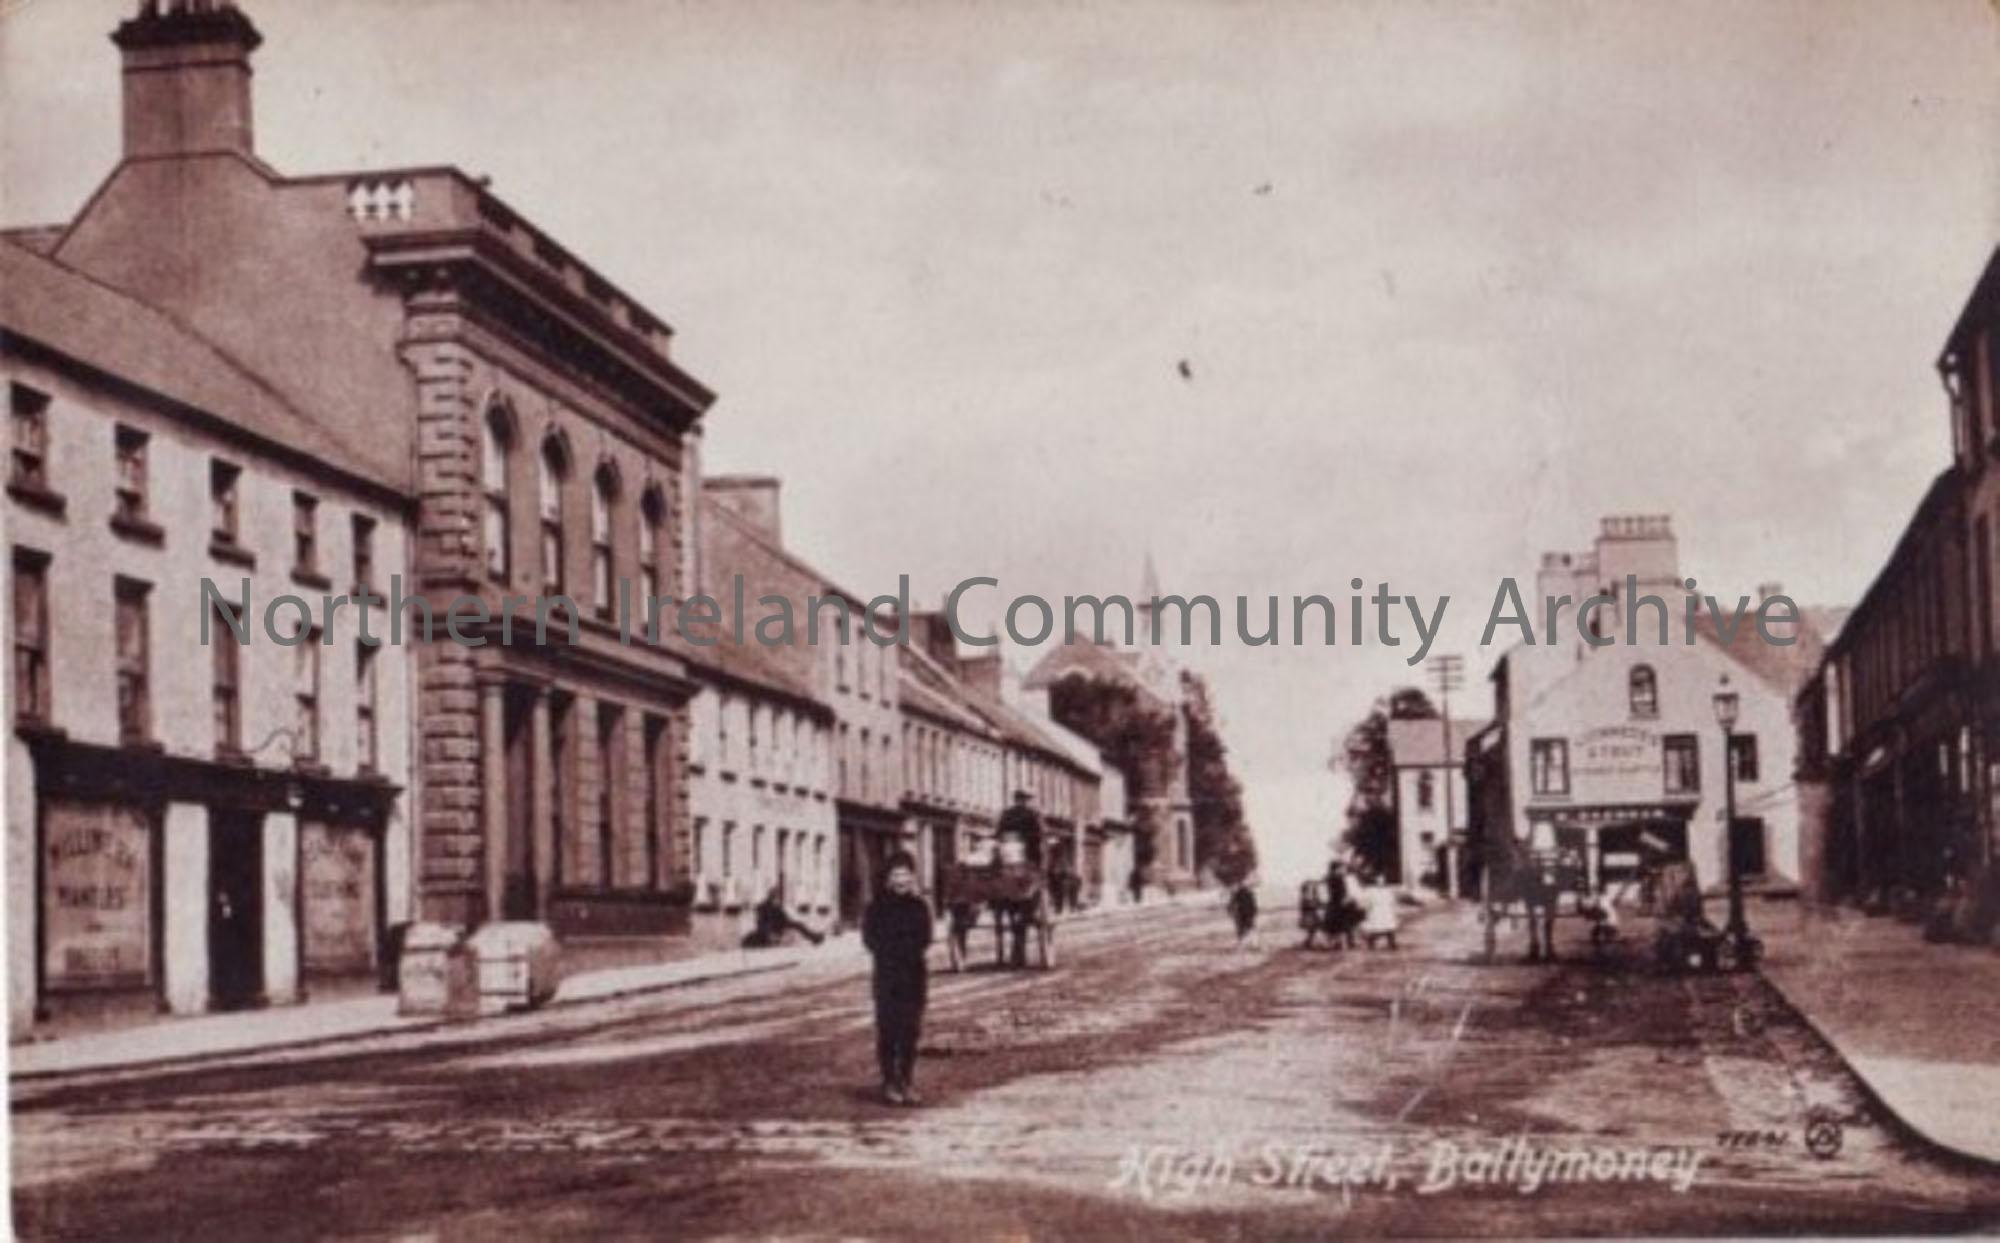 Picture is of High Street, Ballymoney, early 20th century.